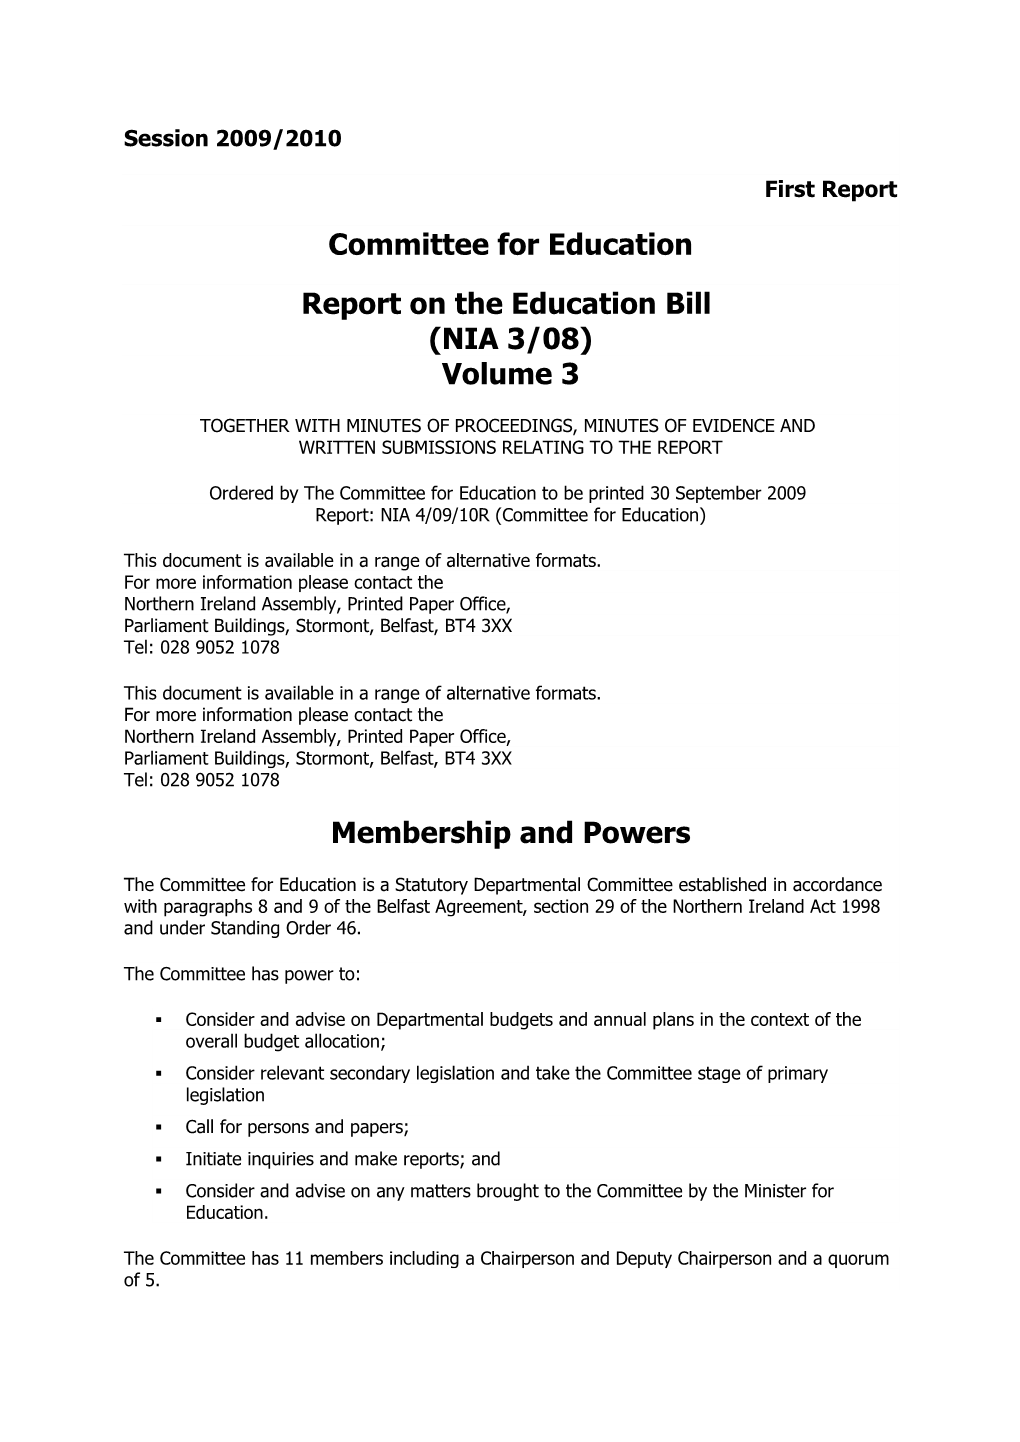 Committee for Education Report on the Education Bill (NIA 3/08) Volume 3 Membership and Powers